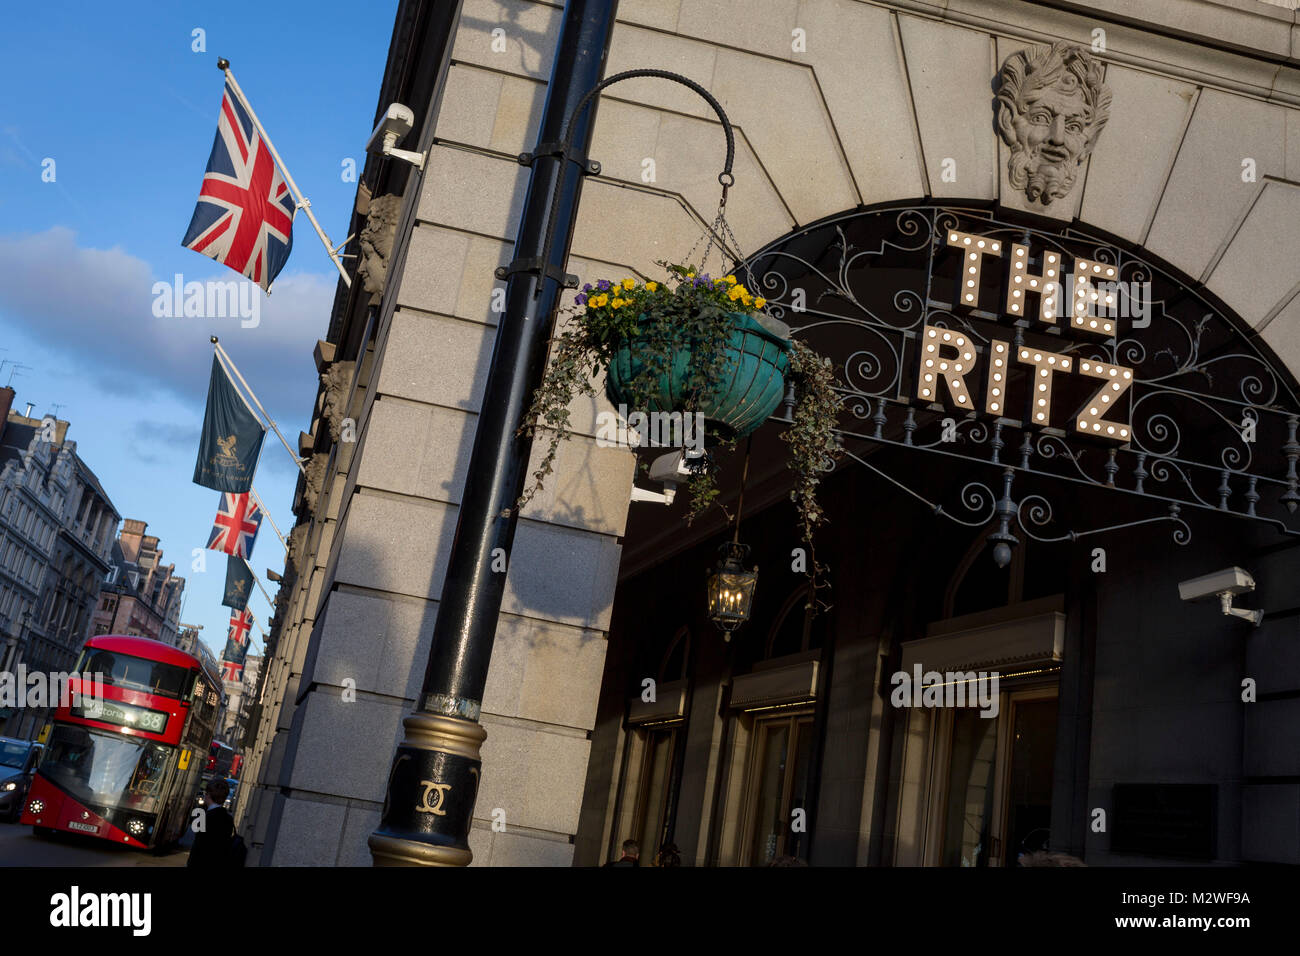 The entrance of the arcade outside The Ritz with Union Jack flags, a Routemaster bus and distant architecture on Piccadilly, on 7th February 2018, in London, England. Stock Photo